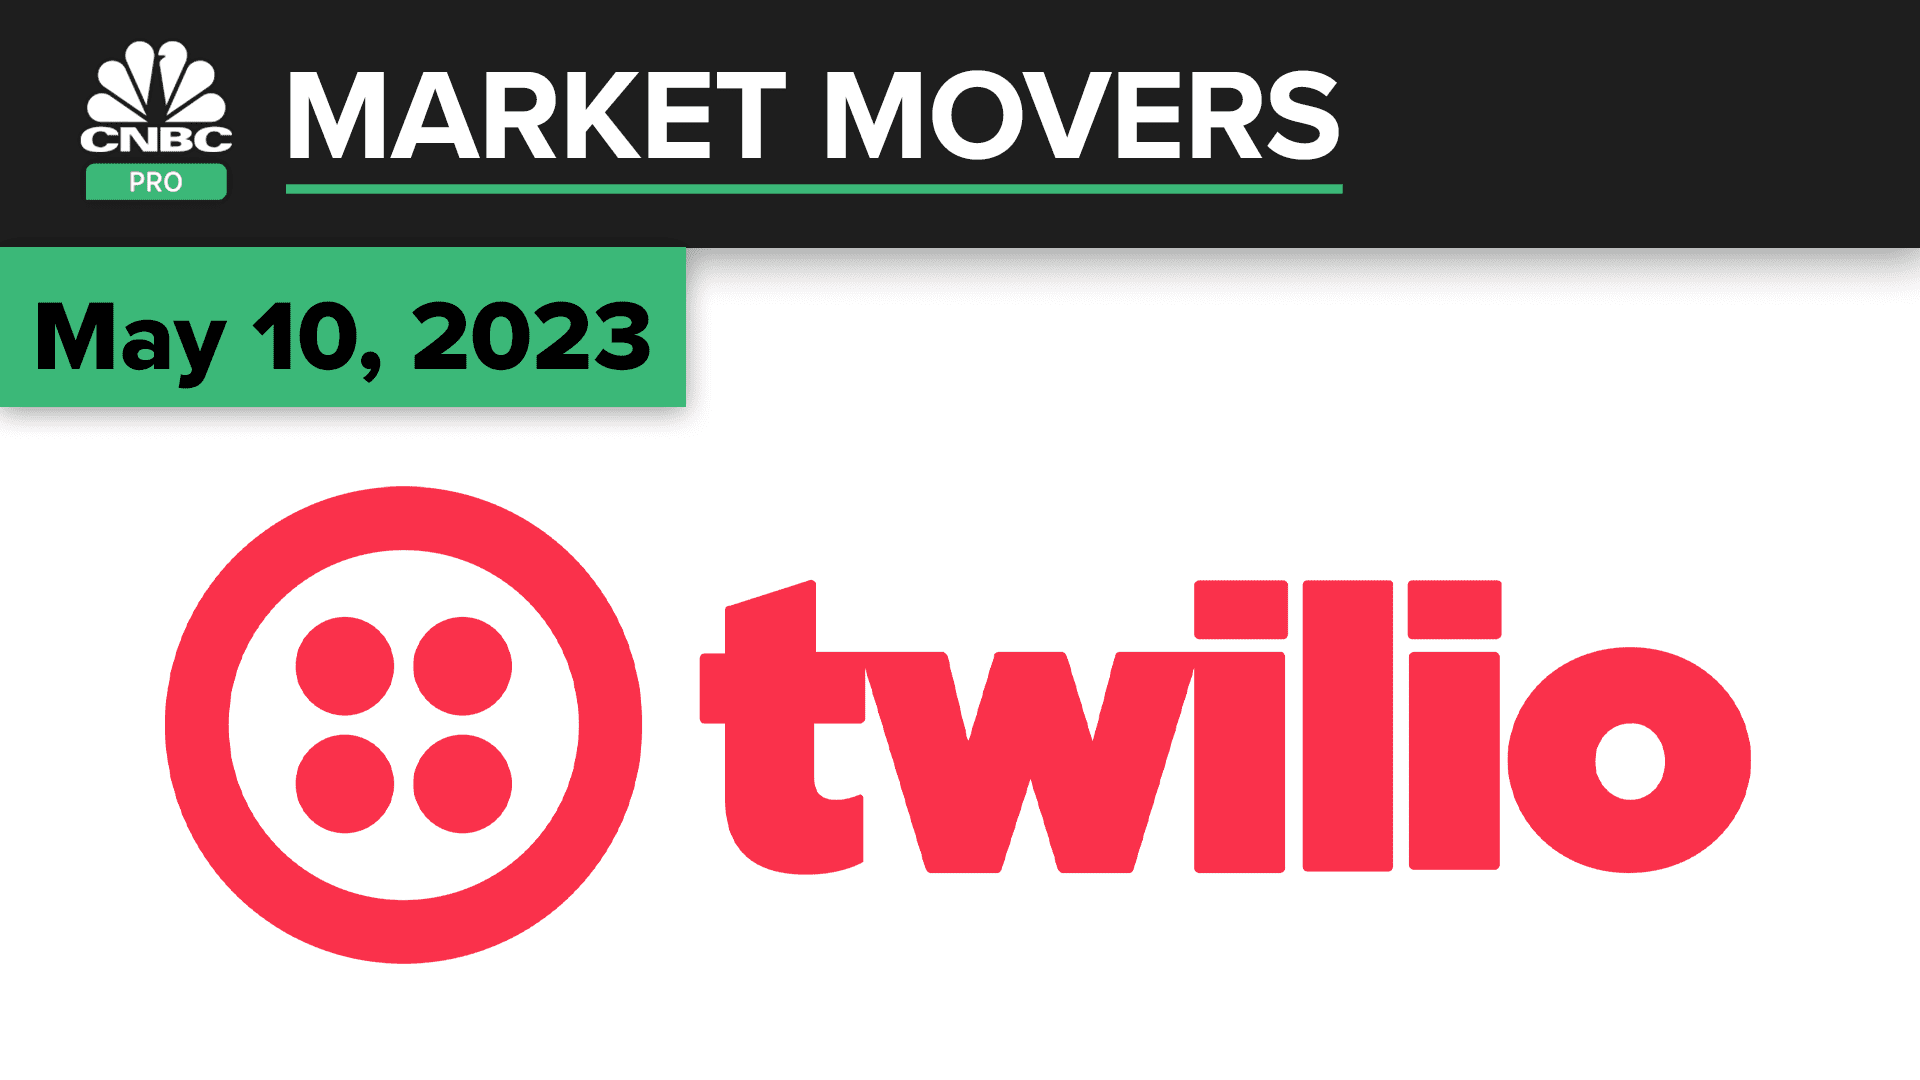 Twilio tanks on 2Q forecast. This is what it could mean for the stock